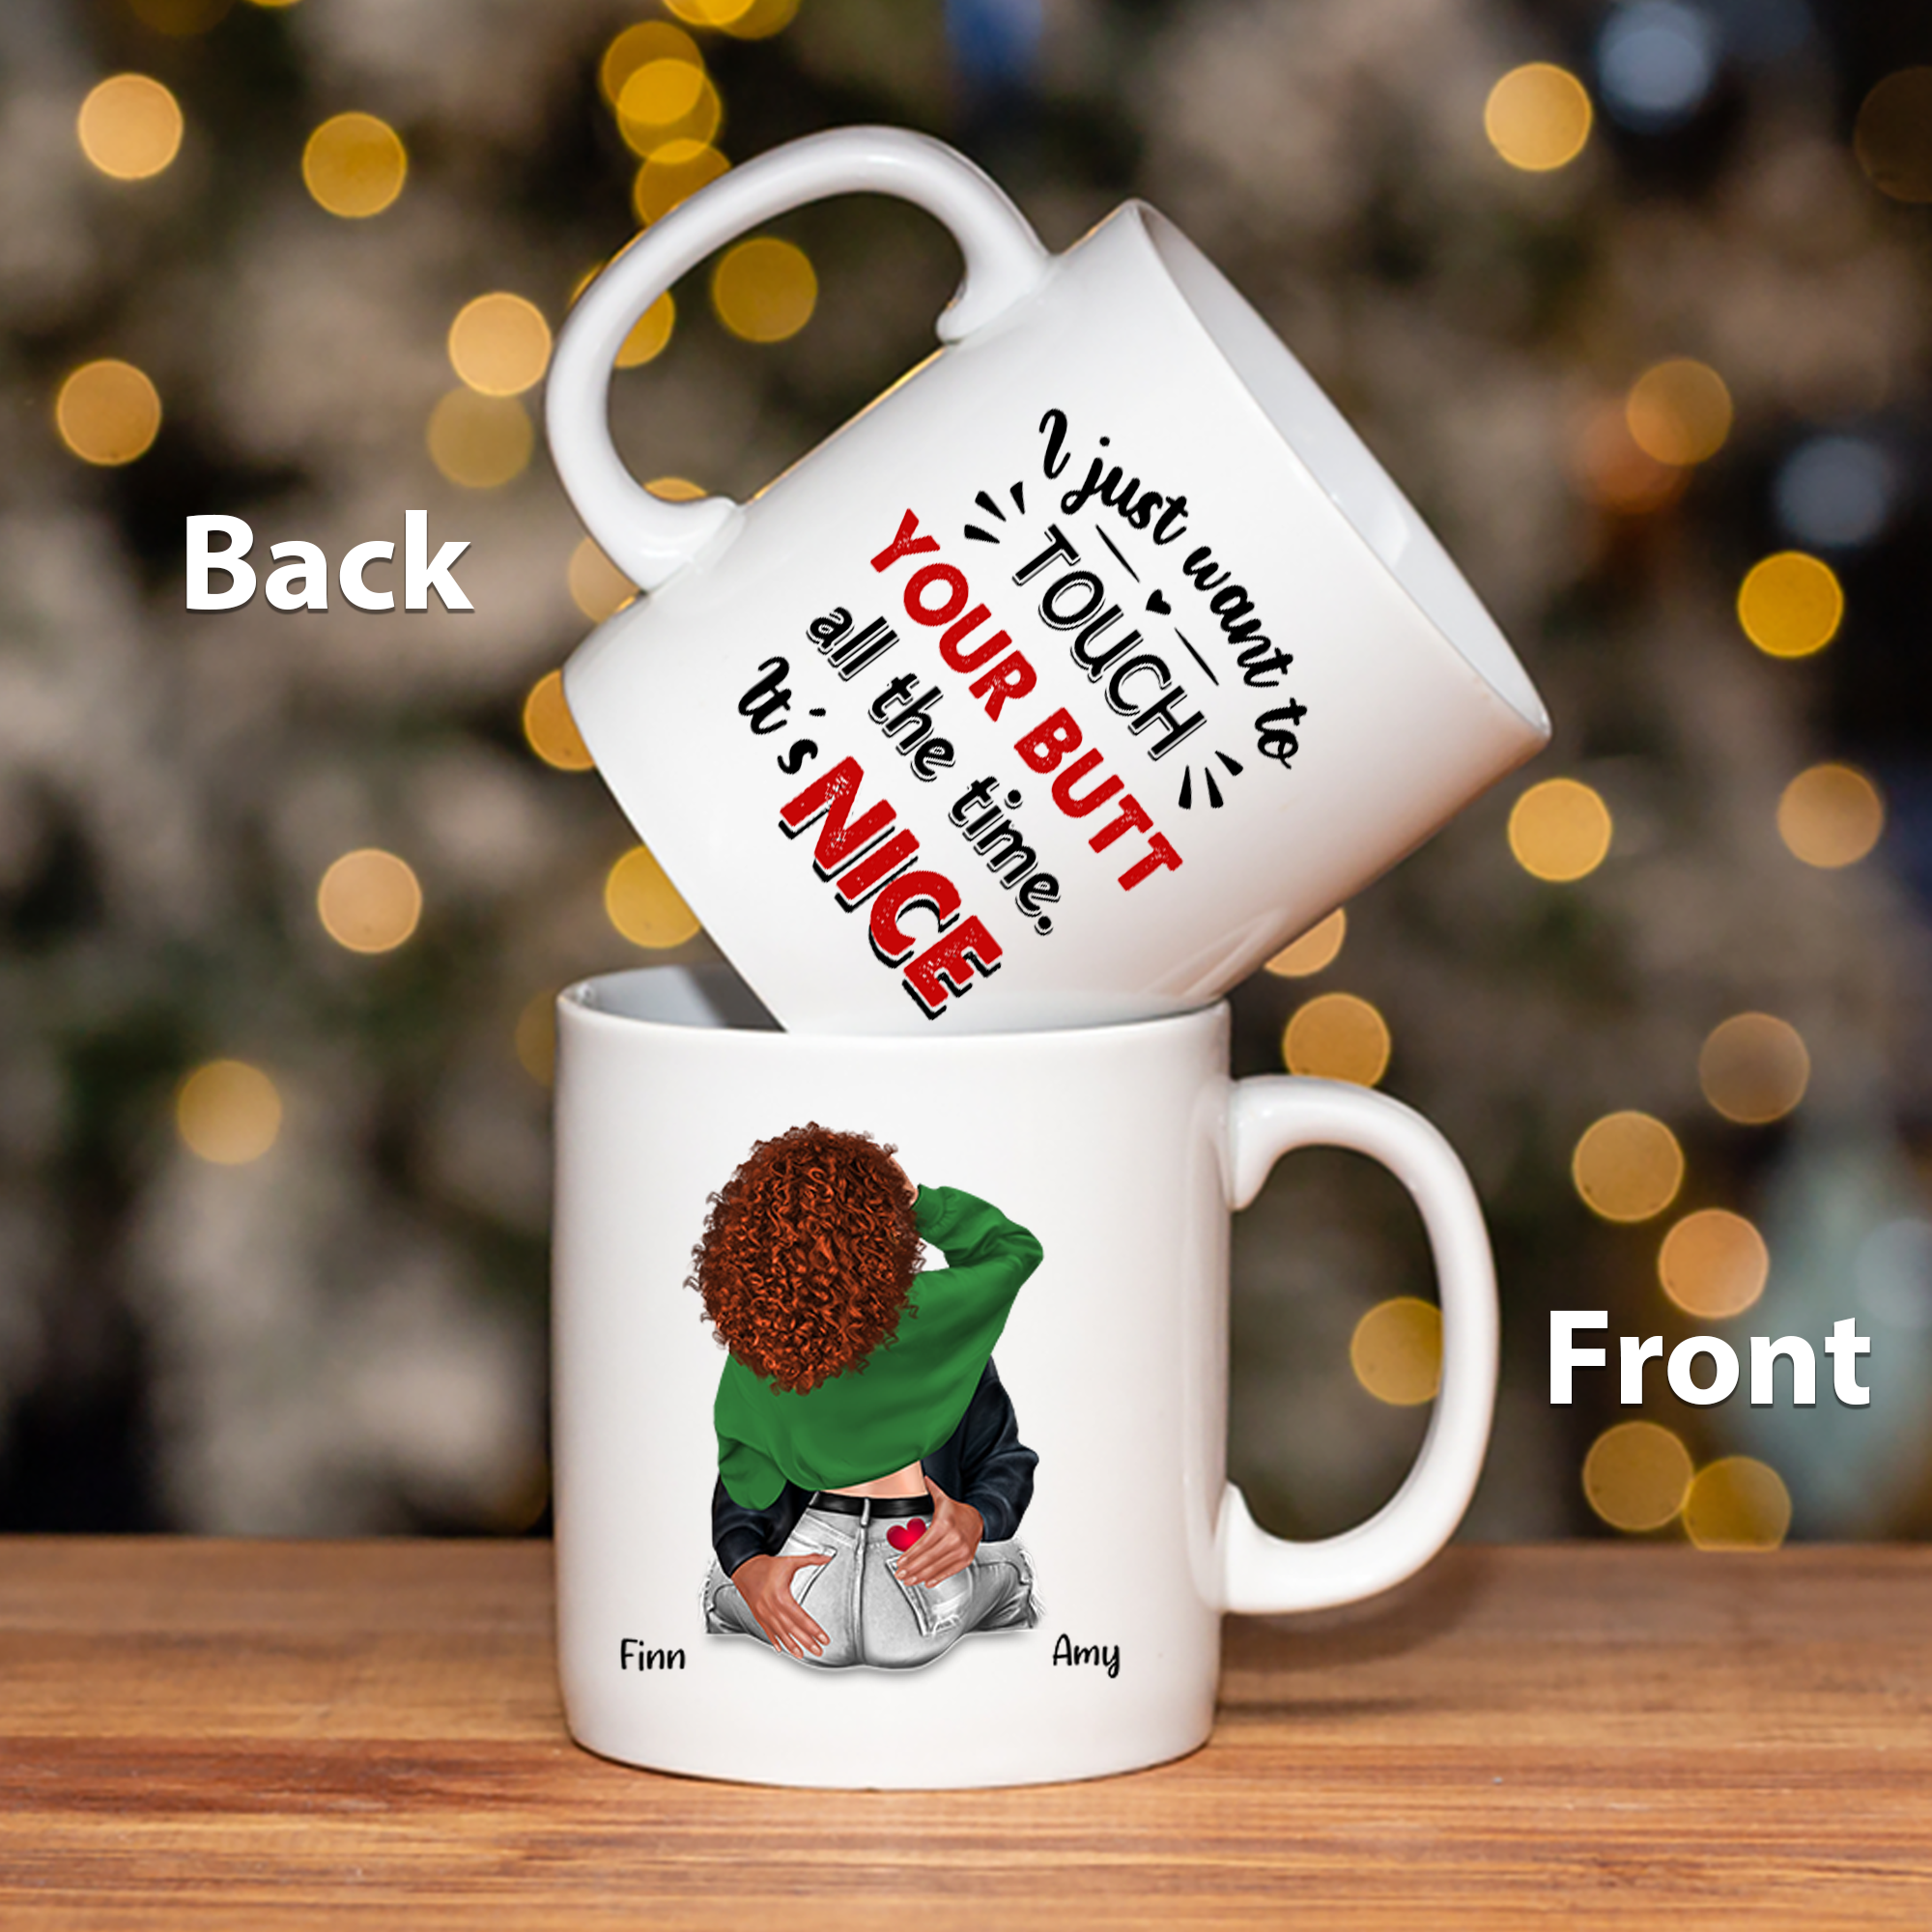 Working From Home Gifts I Work Out Of My Home Mug Stay at Home Mom Ins –  Cute But Rude